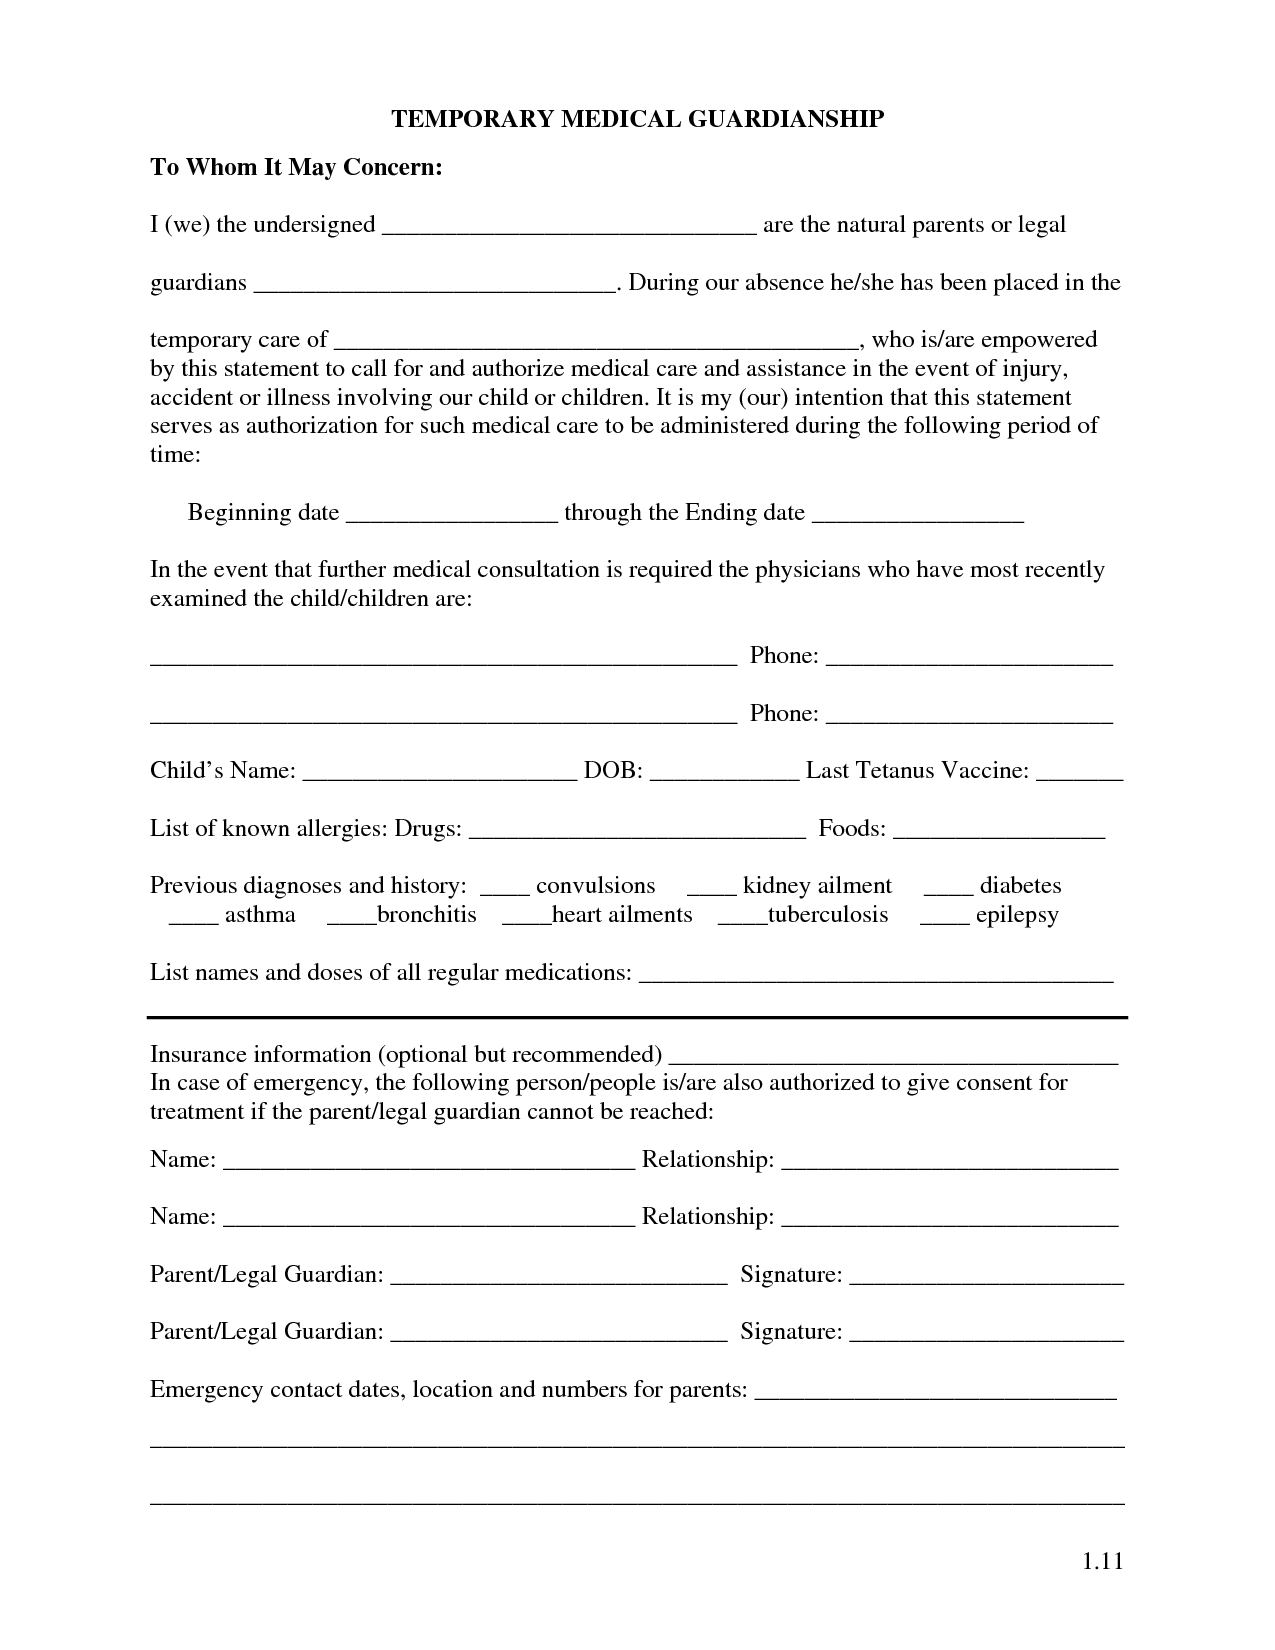 oakland county guardianship papers